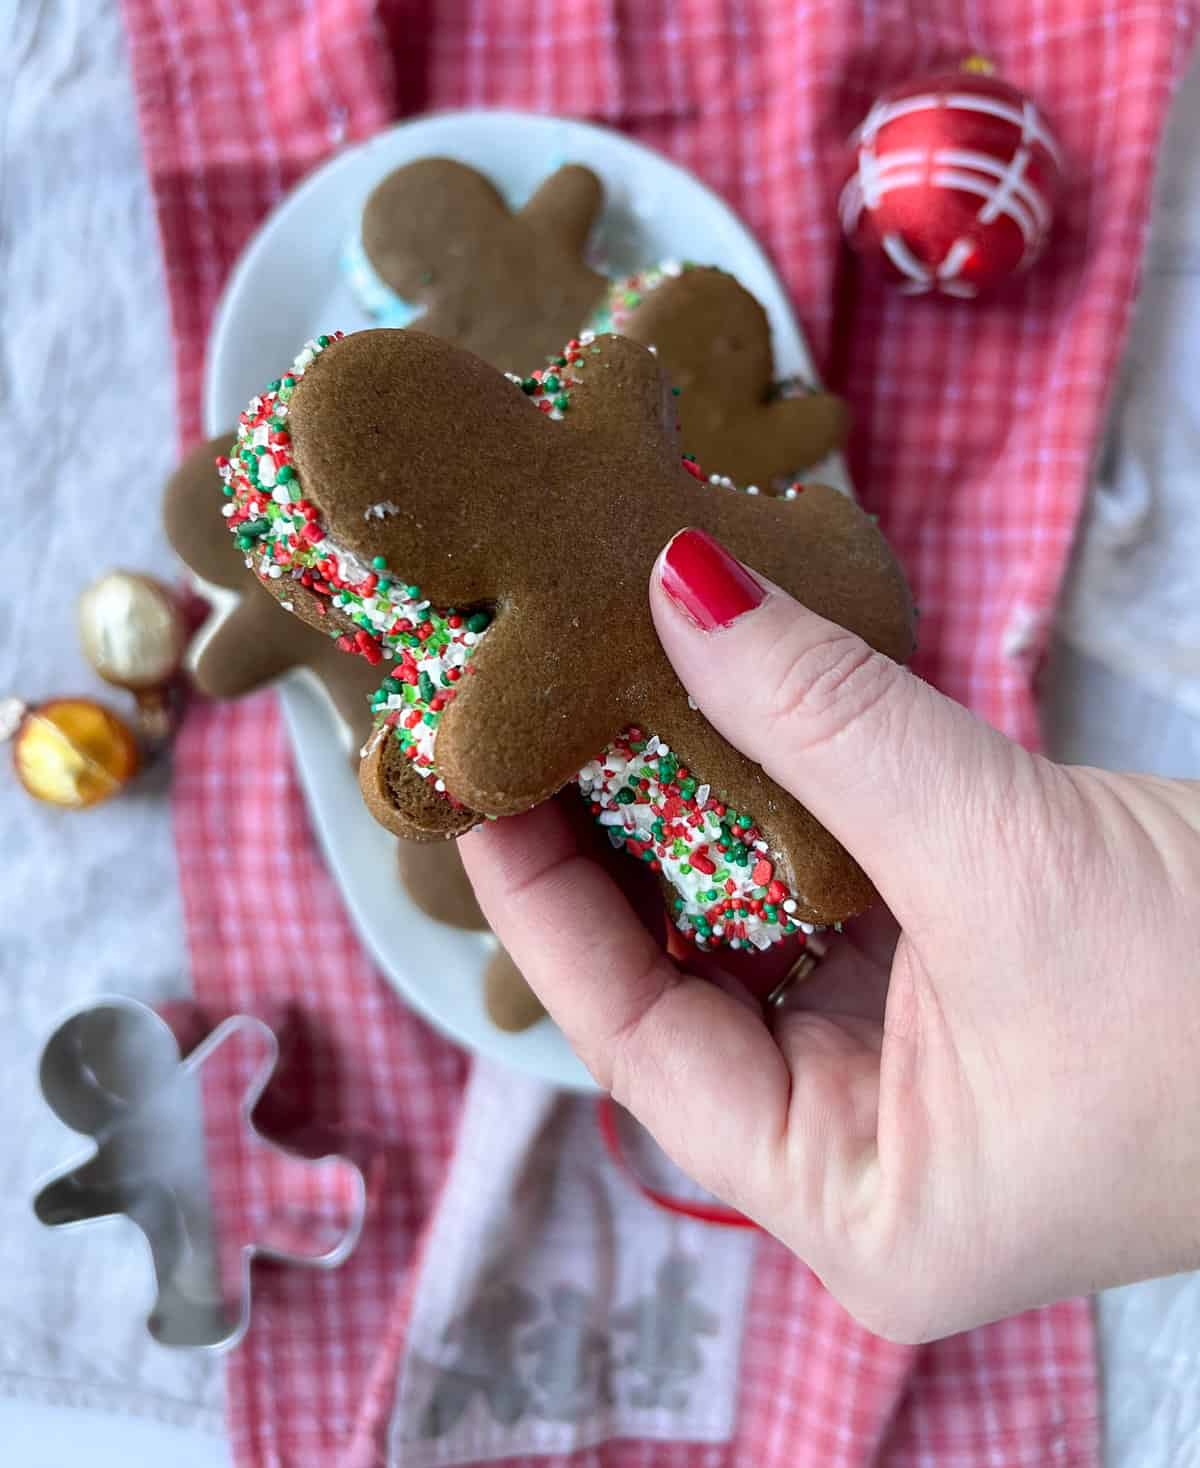 Hand holding a gingerbread ice cream sandwich with sprinkles.